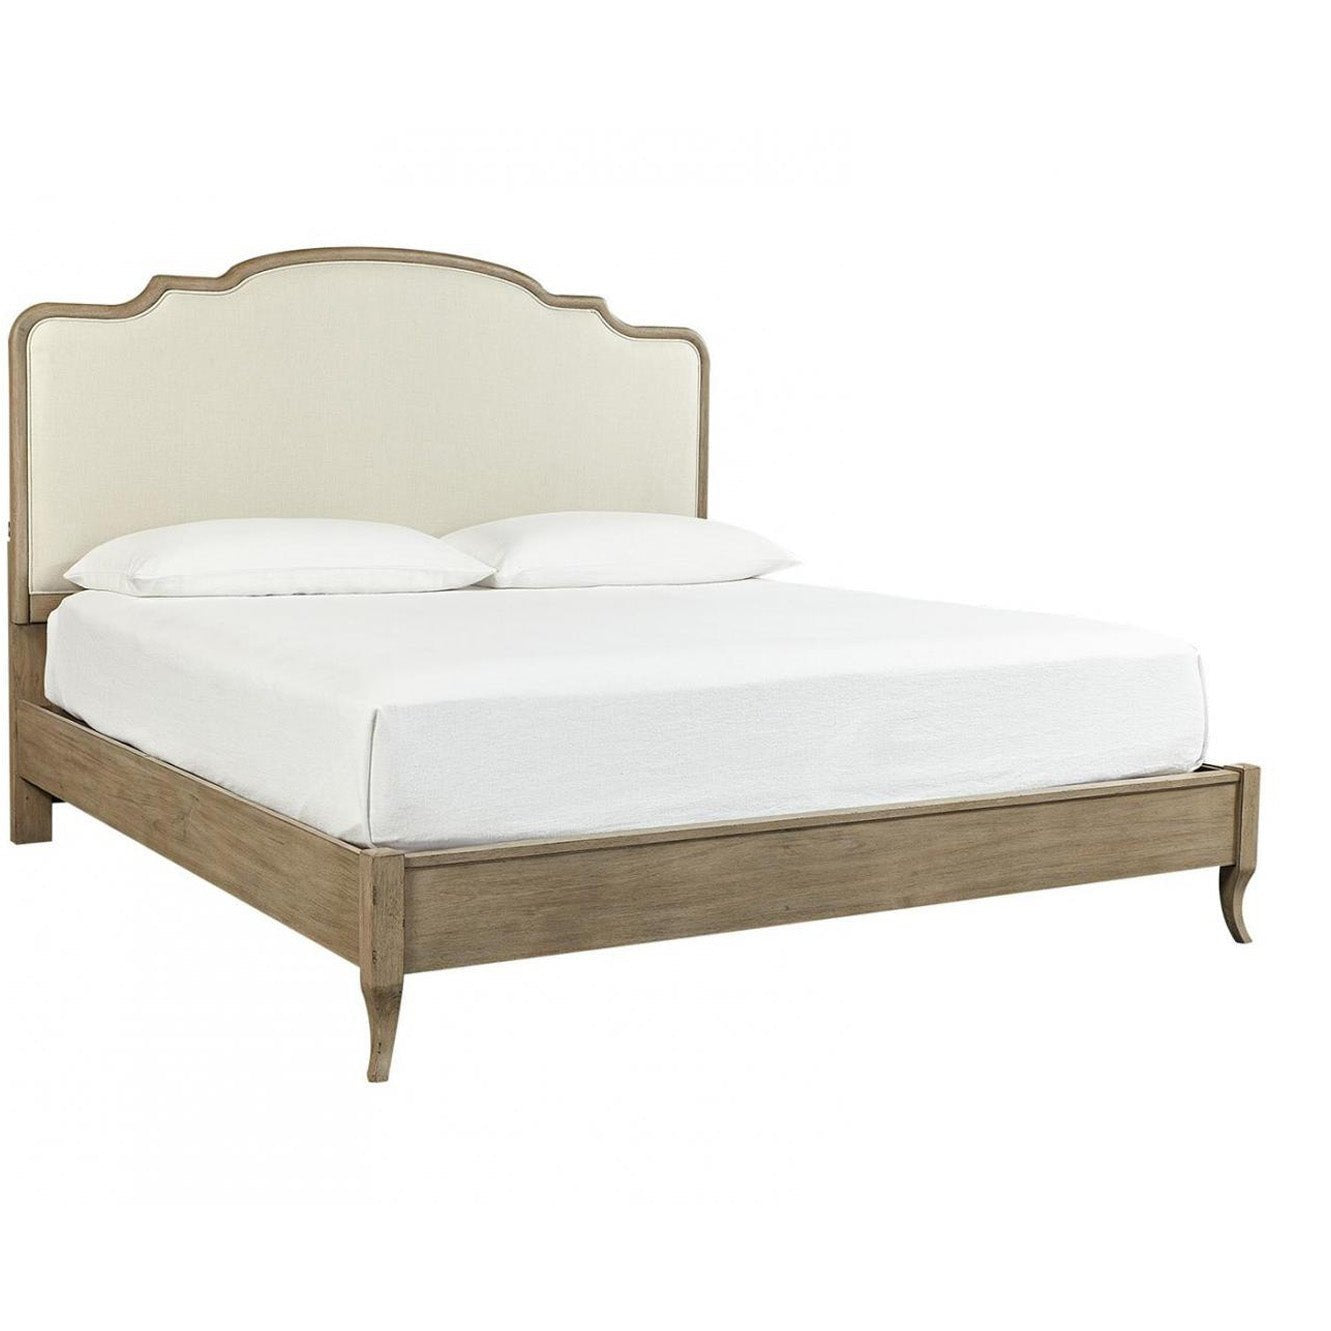 PROVENCE KING BED